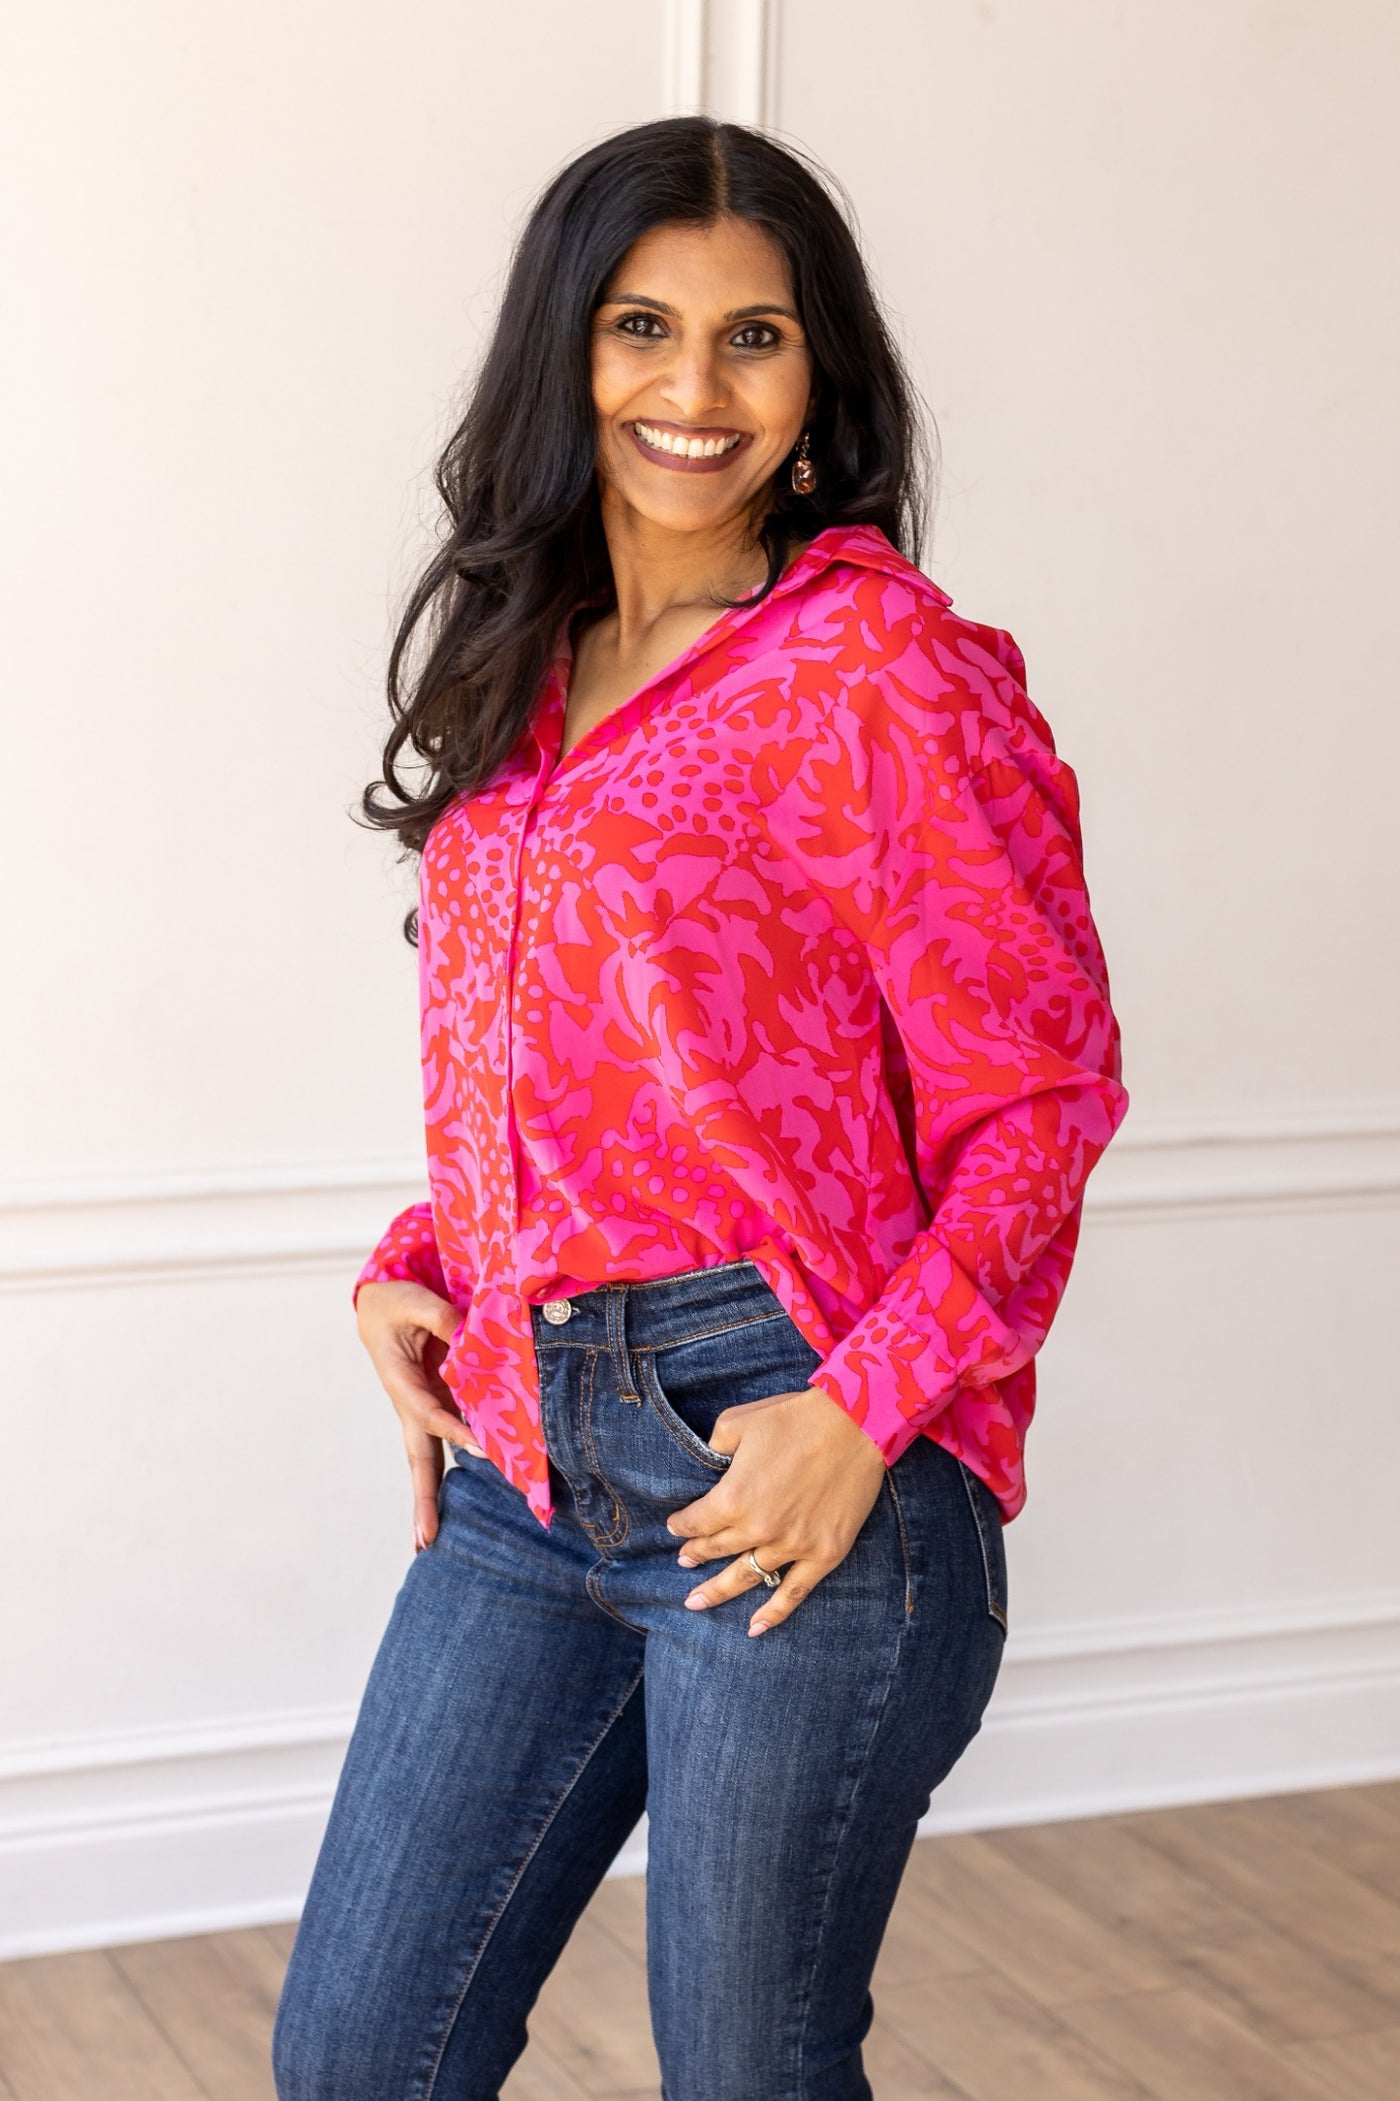 The Kathryn Hot Pink Abstract Floral Button Down Top